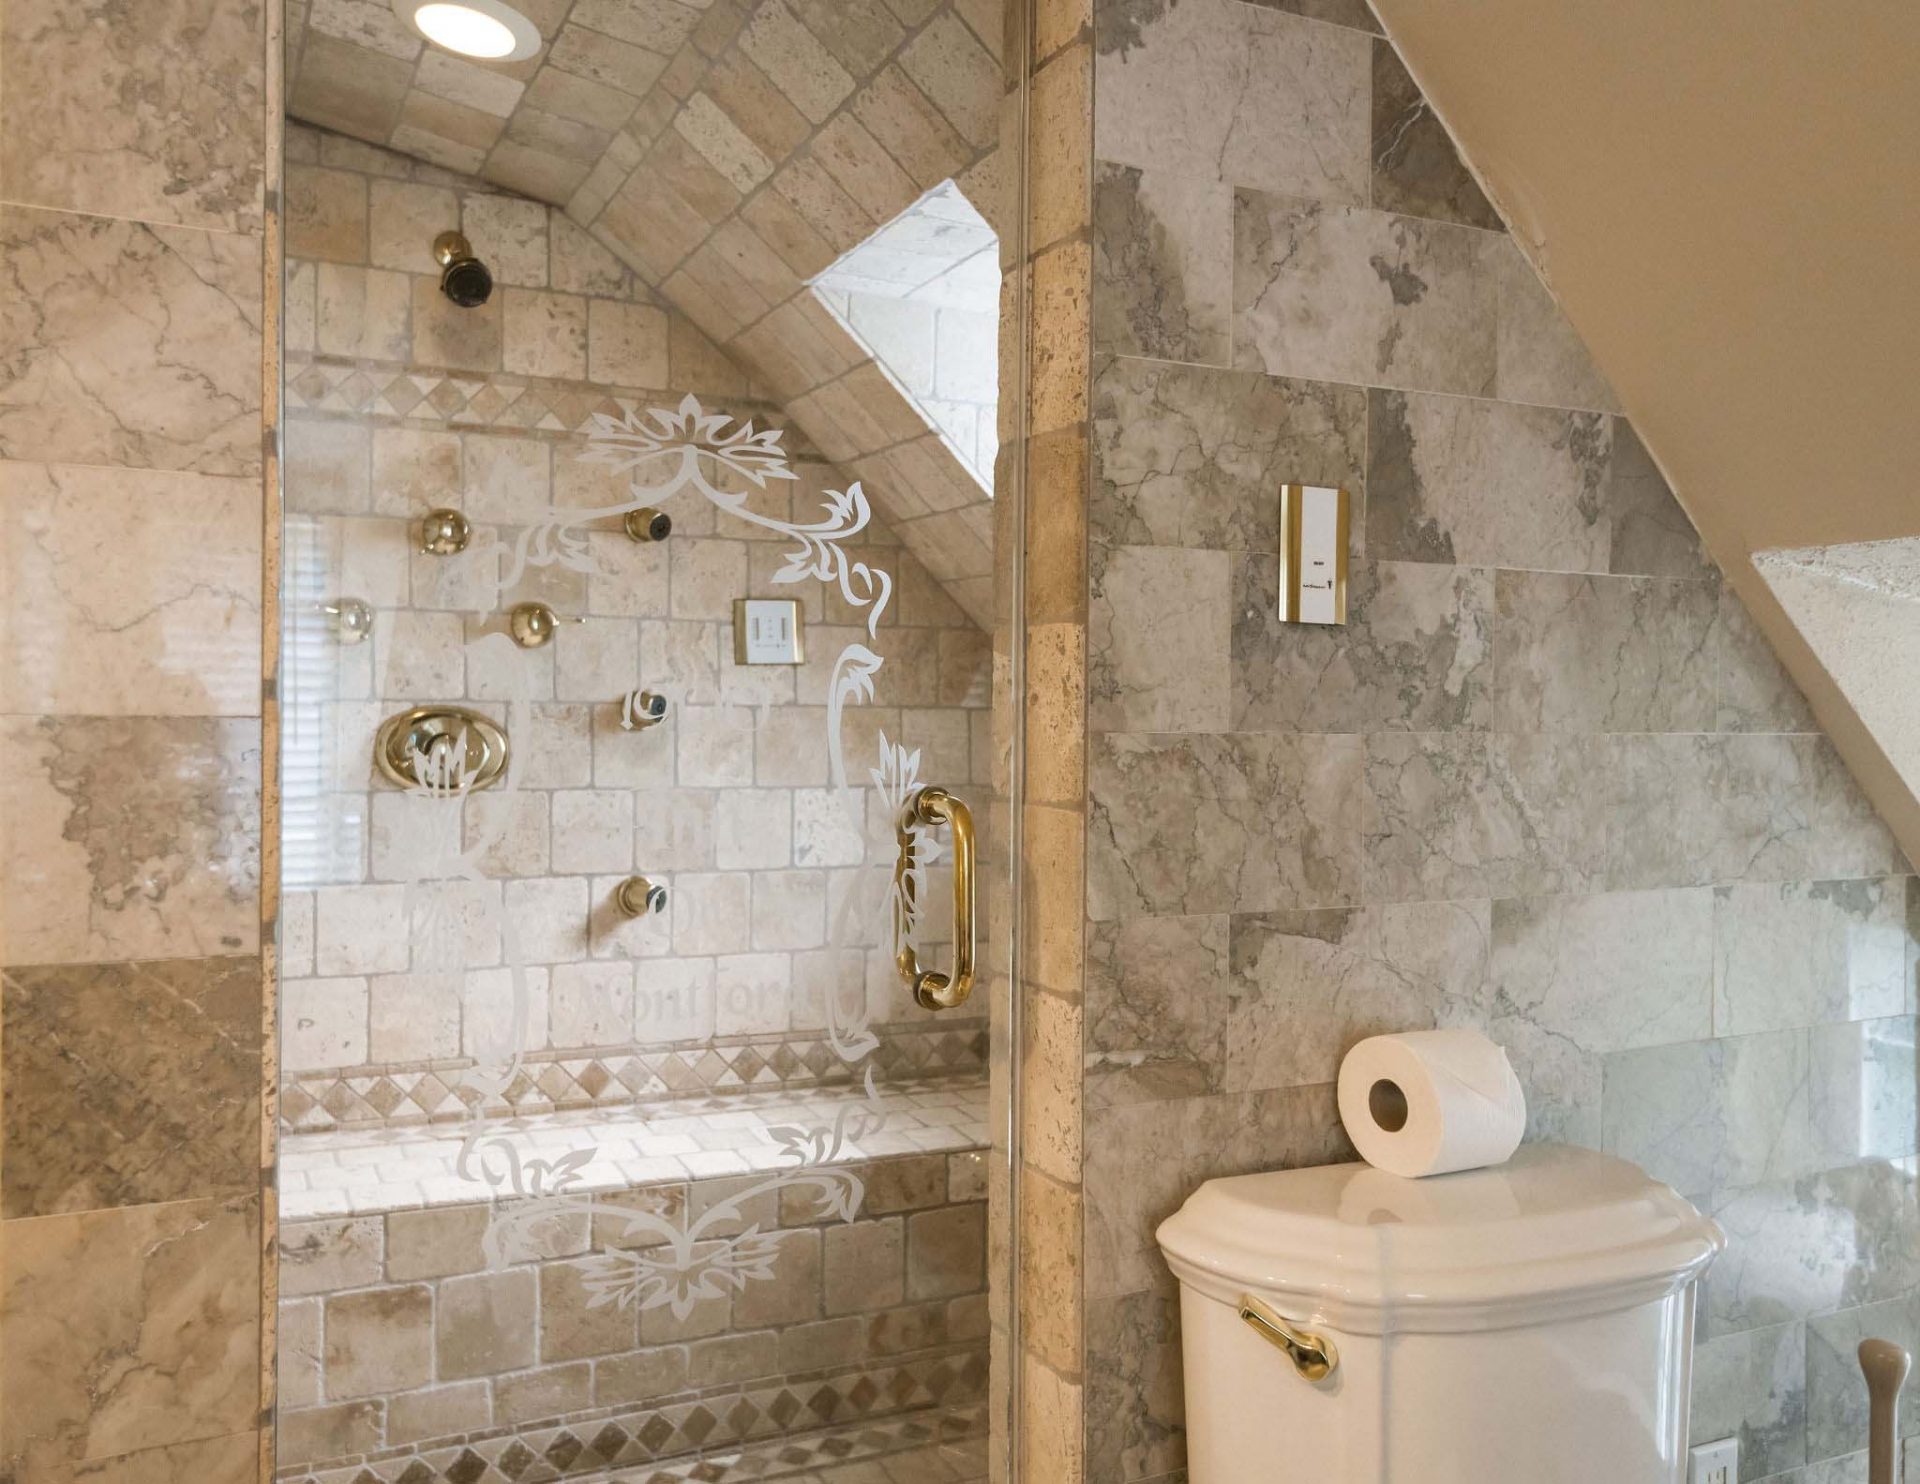 Private bathroom with beige, decorative tiles and a glass door, with a steam shower with multiple body jets.